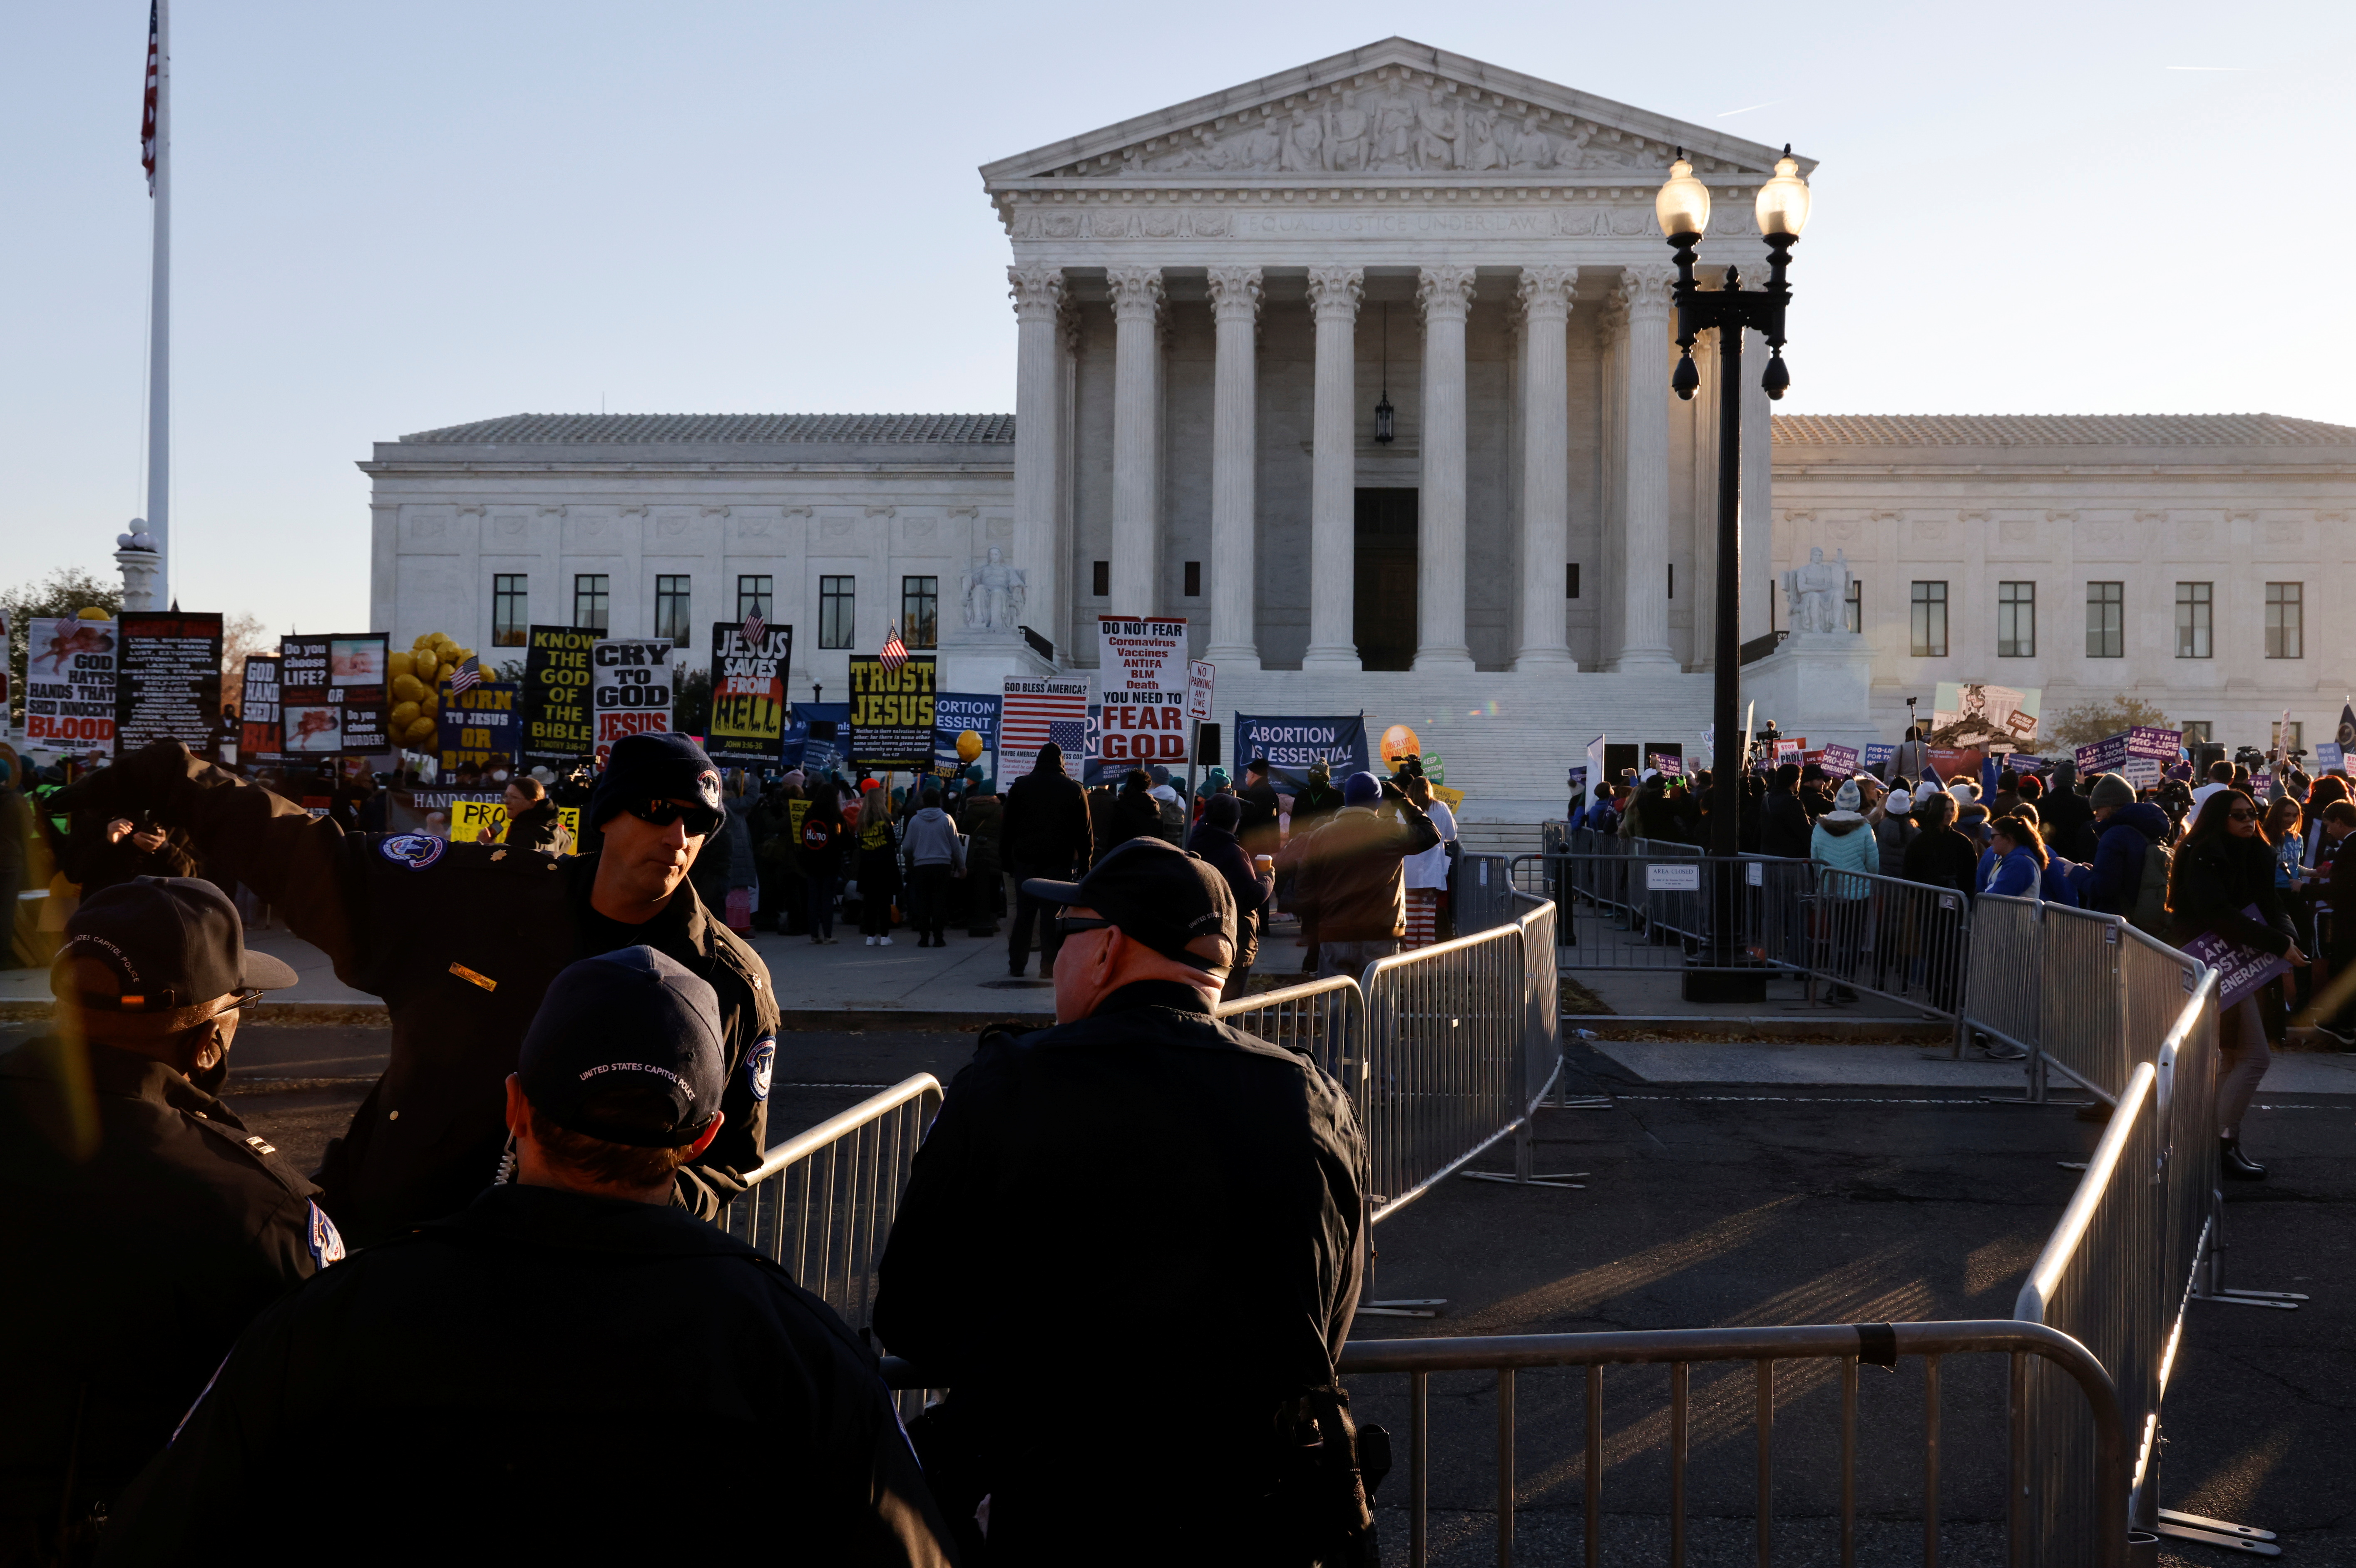 Supreme Court Police officers erect a barrier between anti-abortion and pro-abortion rights protesters outside the court building, ahead of arguments in the Mississippi abortion rights case Dobbs v. Jackson Women's Health, in Washington, U.S., December 1, 2021. REUTERS/Jonathan Ernst